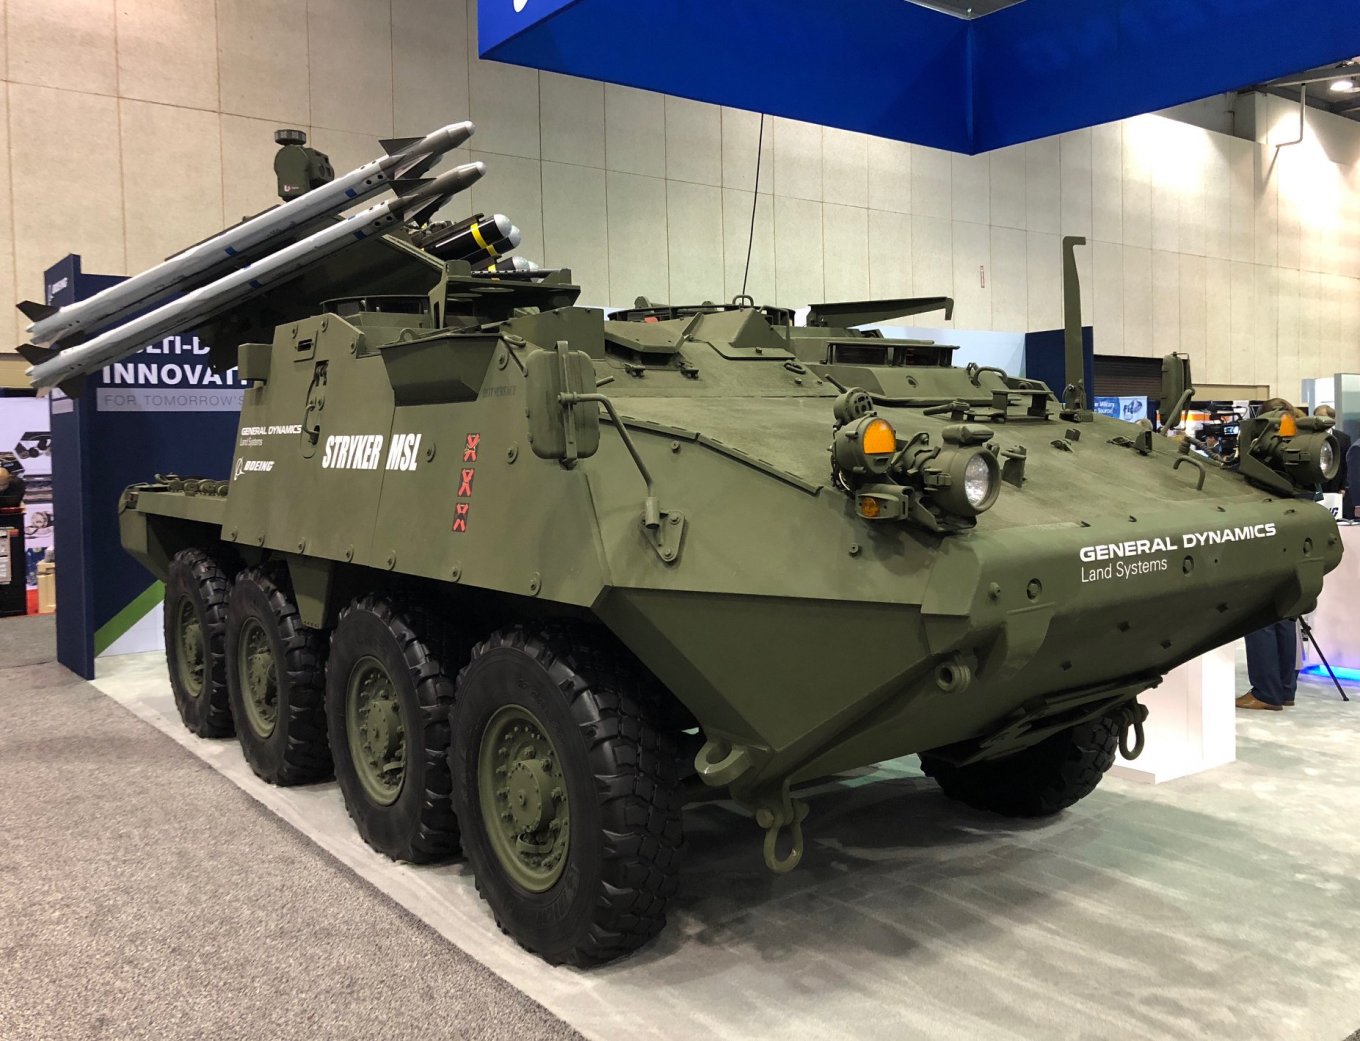 The Stryker vehicle Defense Express The United States and Ukraine Signed a Memorandum of Understanding to Jointly Produce Weapons and Exchange Technical Information